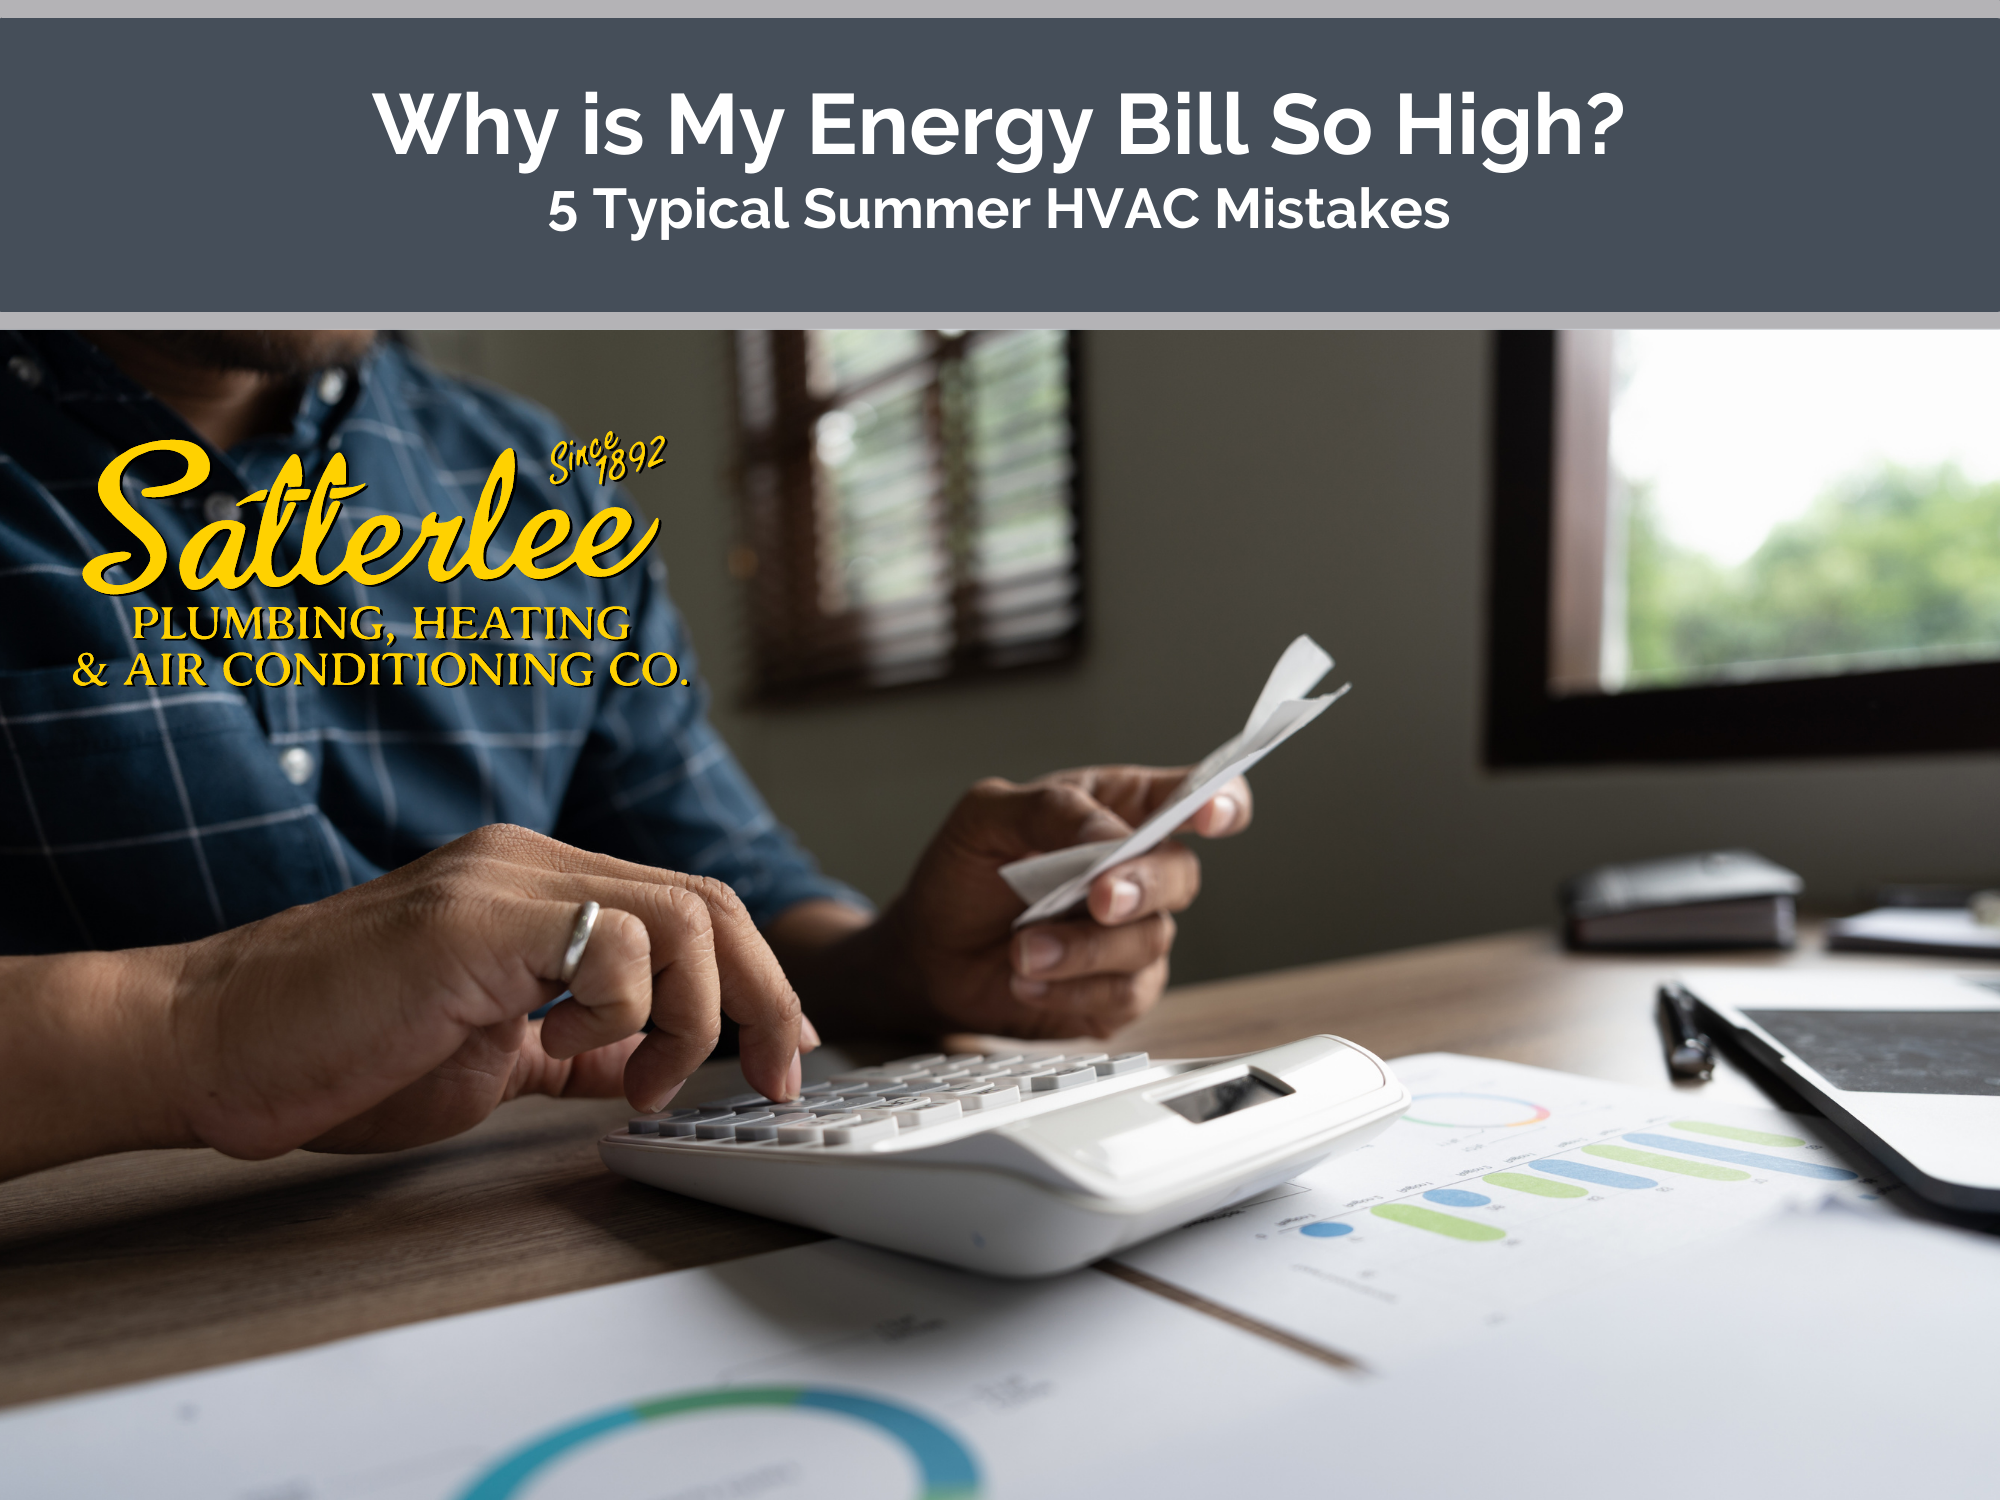 Why is My Energy Bill So High? 5 Typical Summer HVAC Mistakes